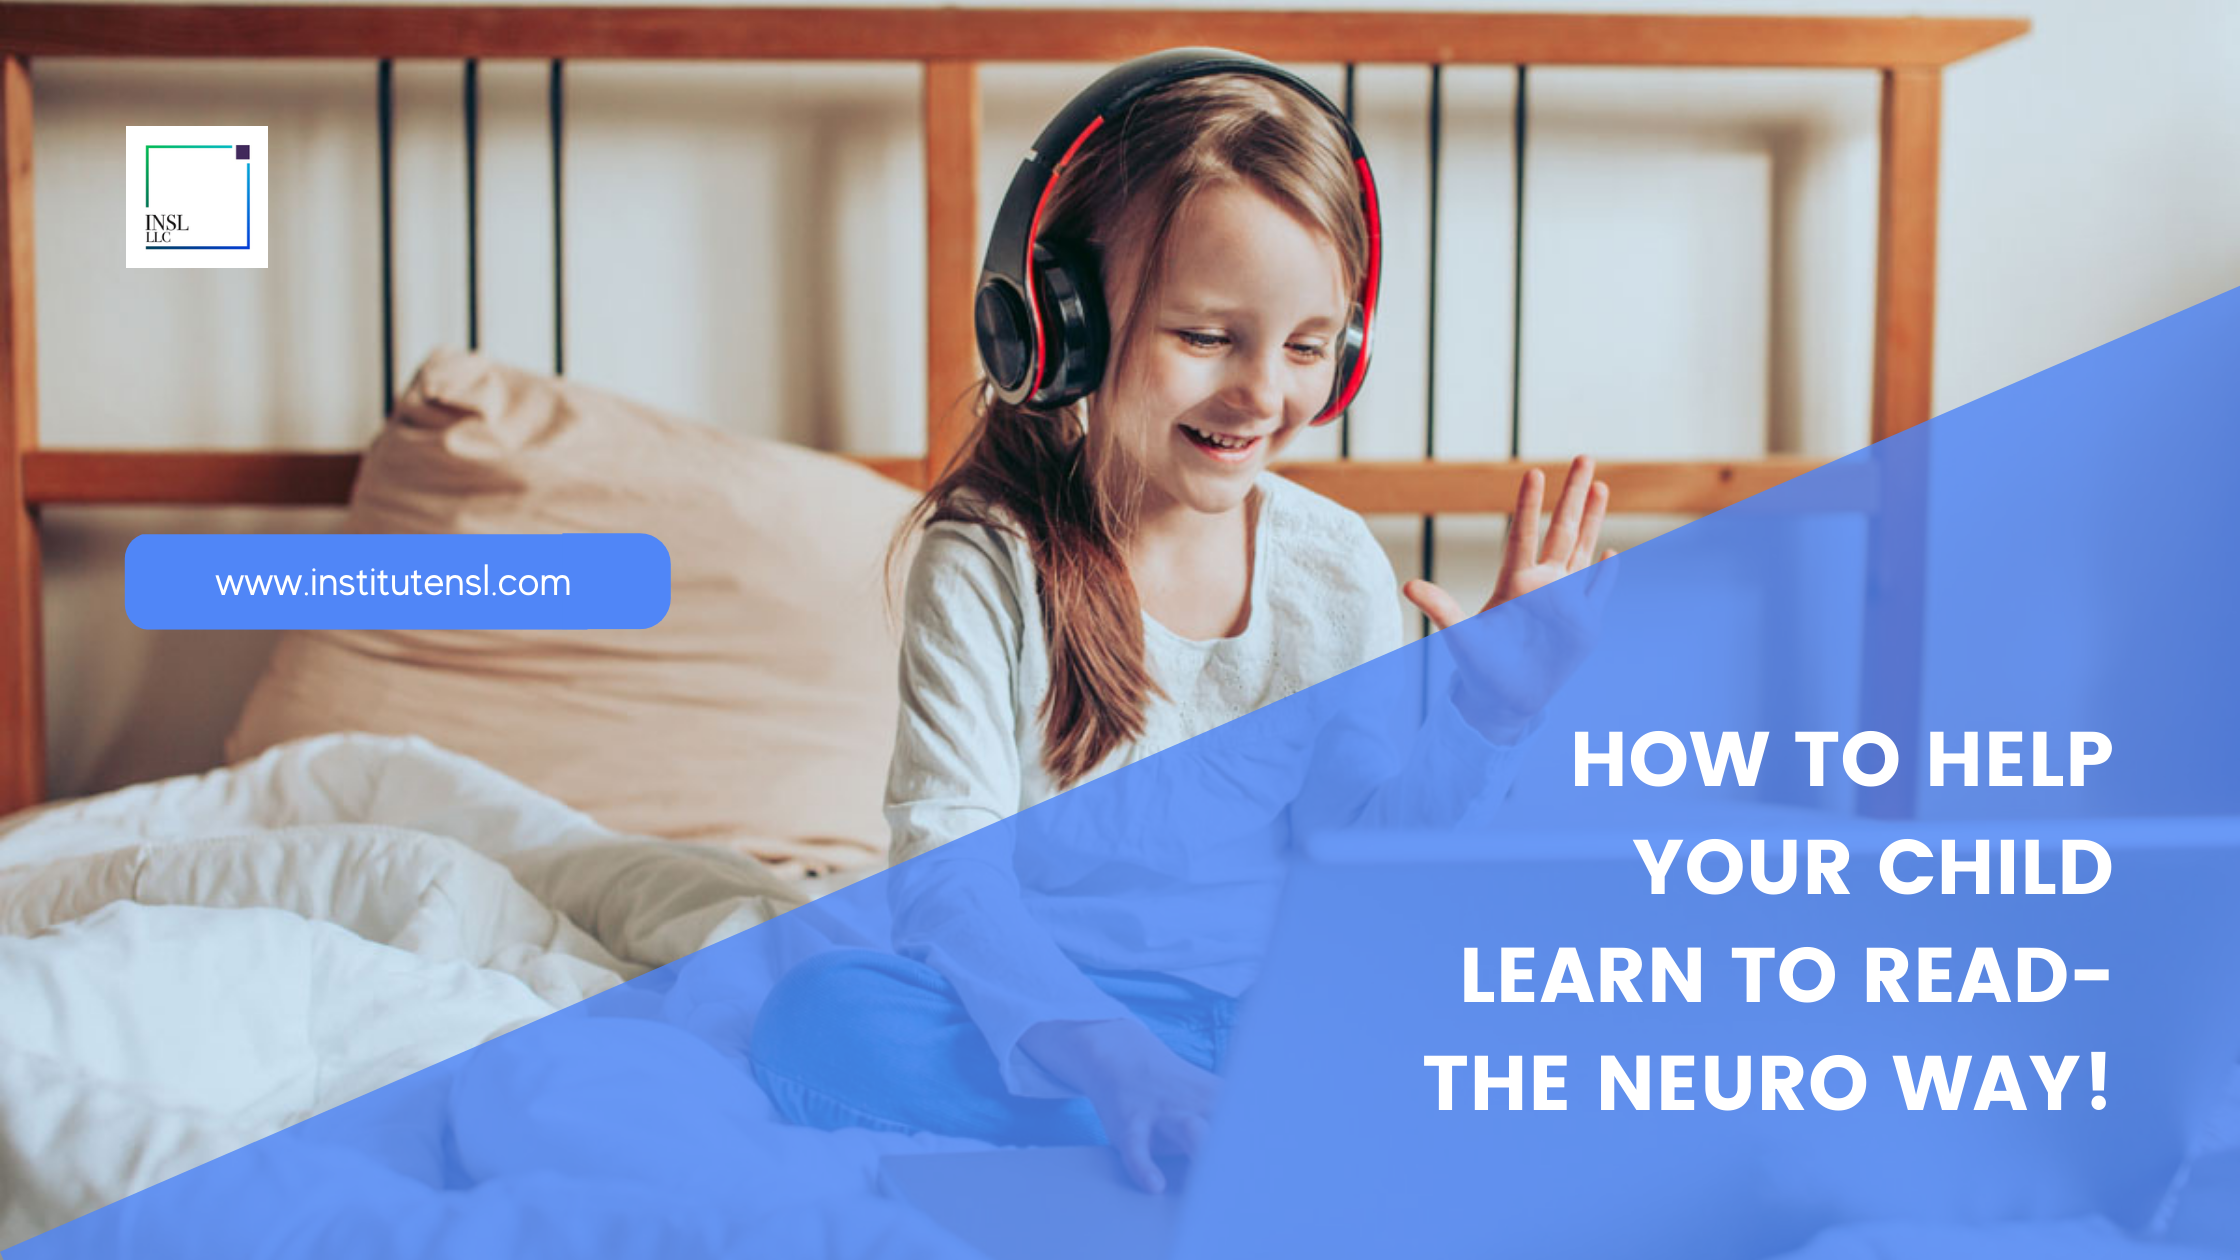 How to help your child learn to read the neuro way